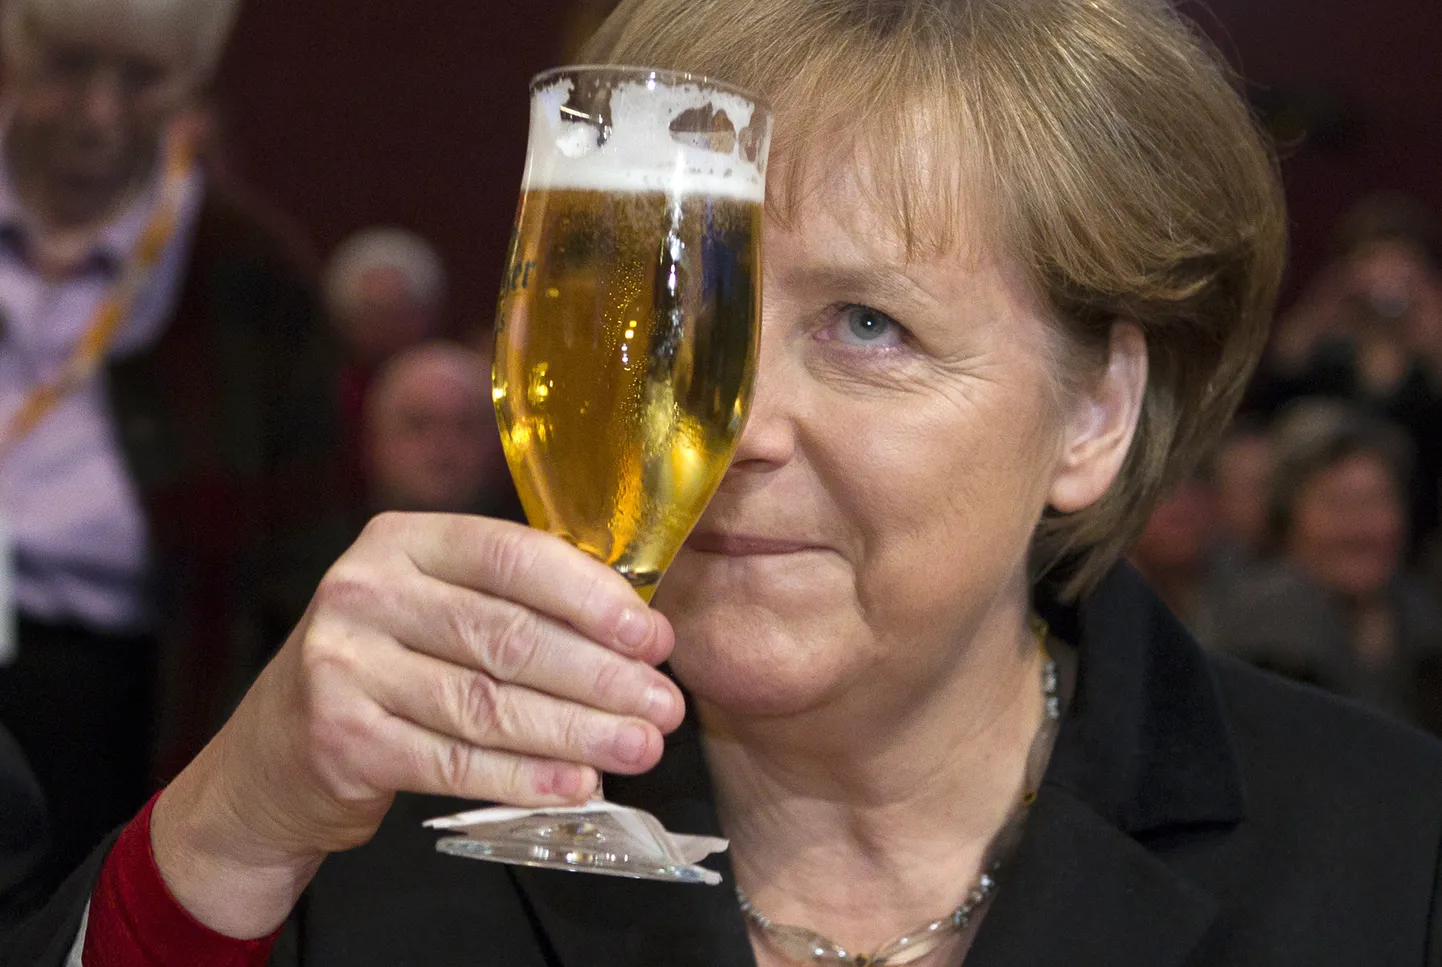 German Chancellor Angela Merkel toasts with a glass of beer during Political Ash Wednesday meeting of the Christian Democratic Union (CDU) in the northern town of Demmin, February 22, 2012.   REUTERS/Thomas Peter (GERMANY - Tags: POLITICS)